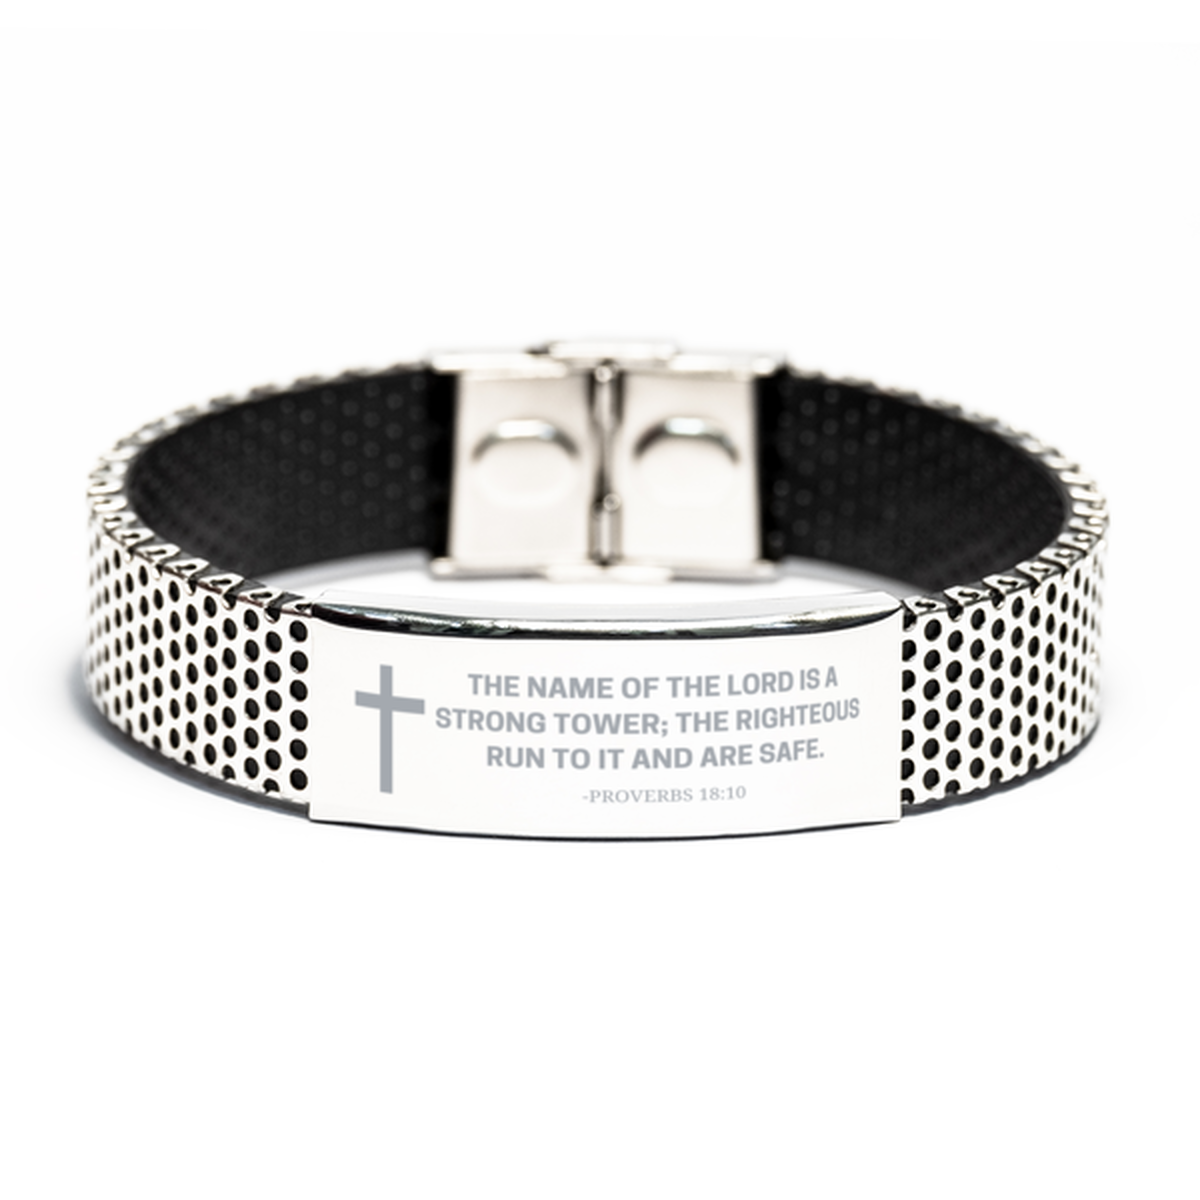 Baptism Gifts For Teenage Boys Girls, Christian Bible Verse Stainless Steel Bracelet, The name of the Lord is a strong, Catholic Confirmation Gifts for Son, Godson, Grandson, Nephew